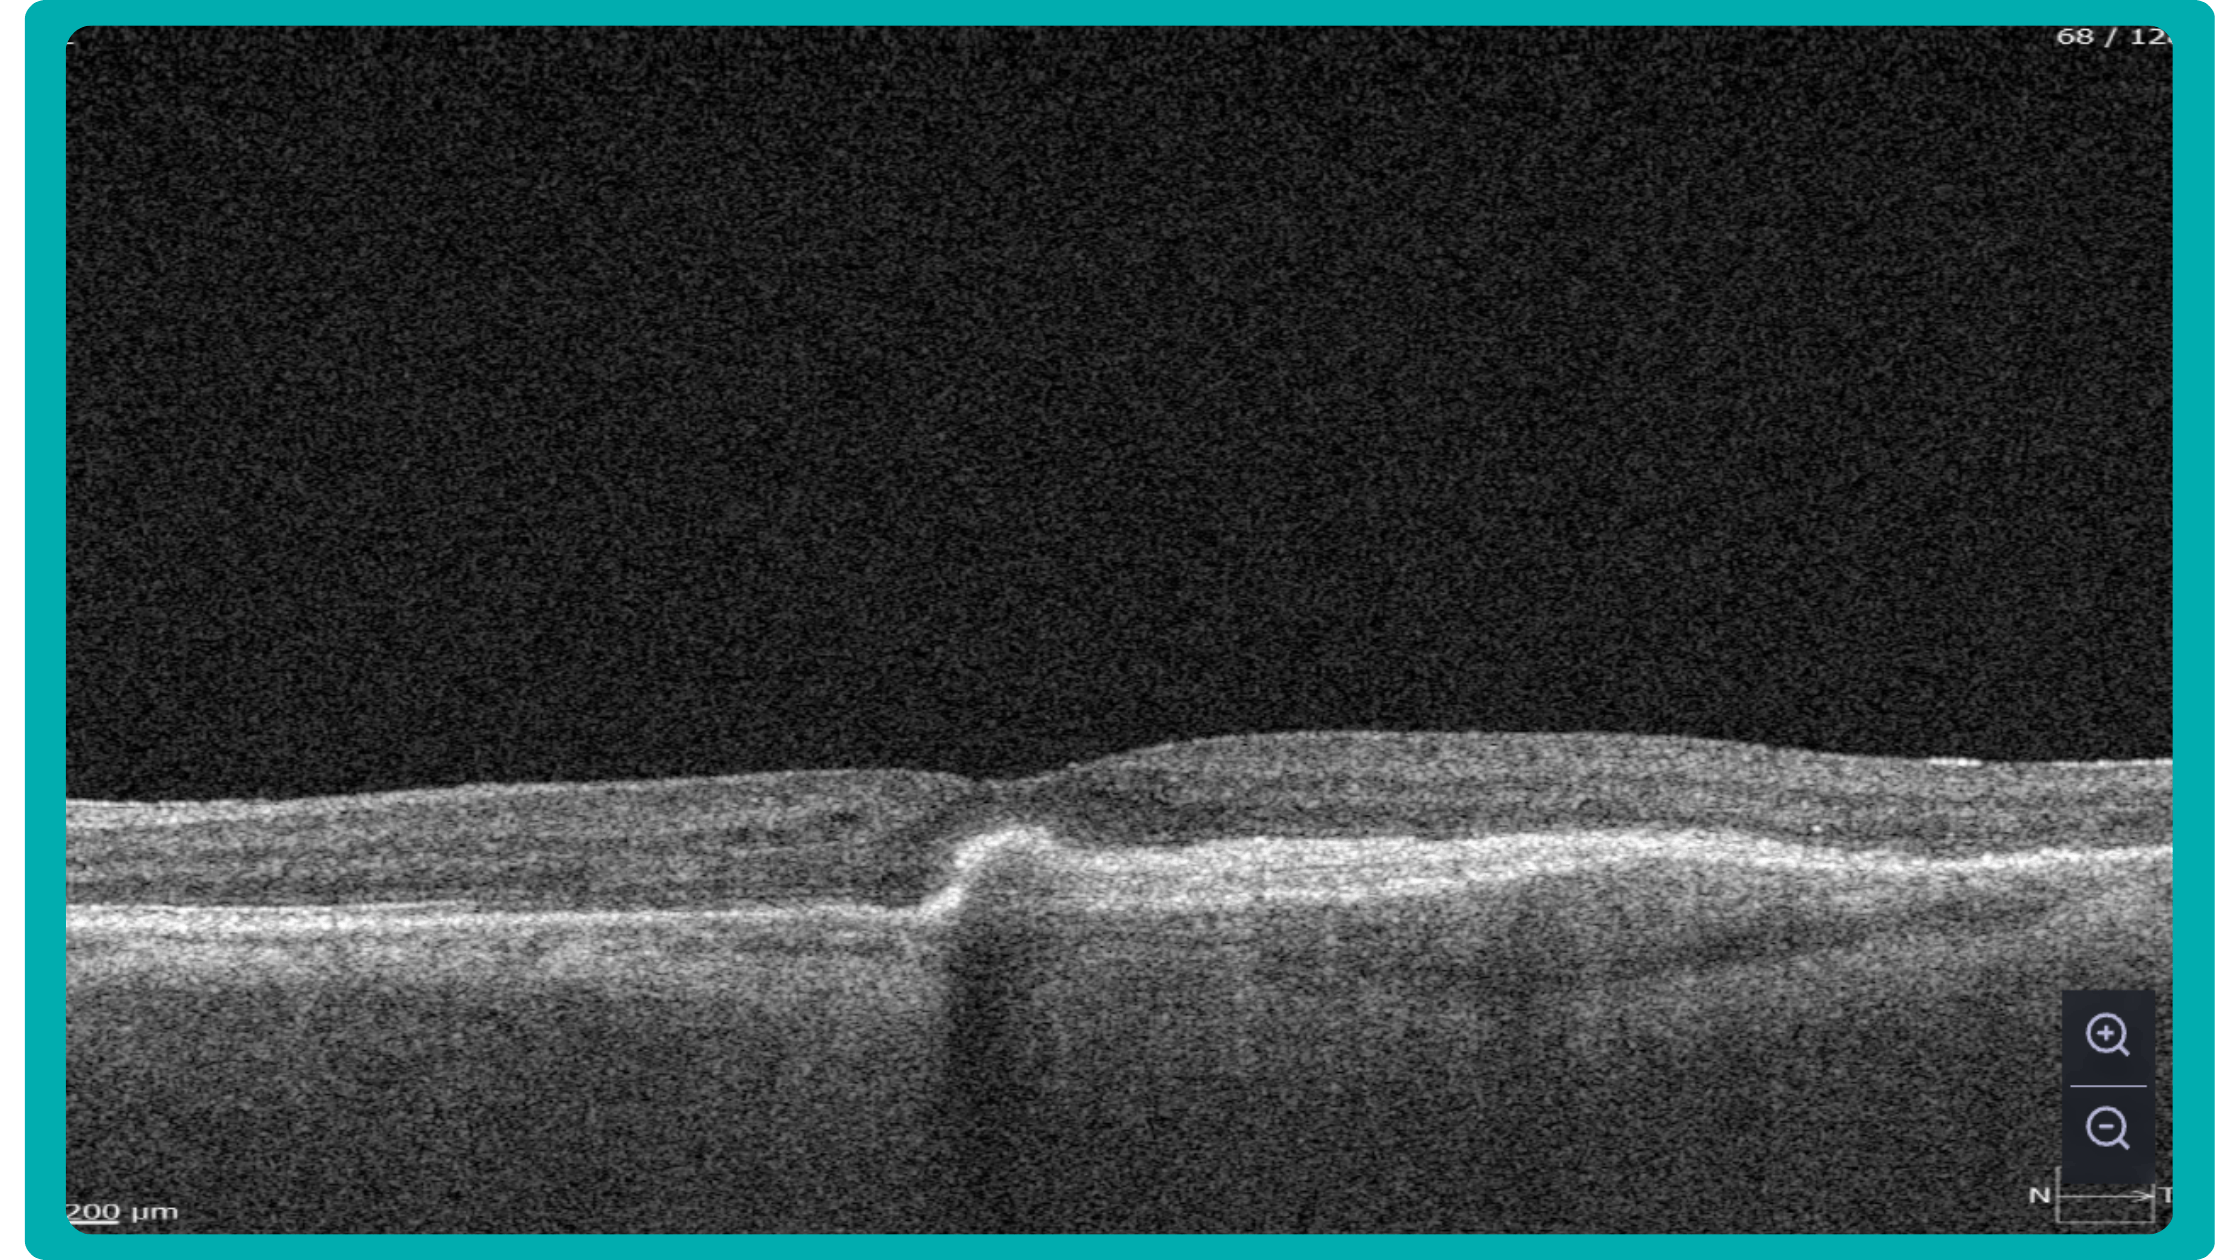 Wet AMD on OCT scan, example provided by ALtris AI platform